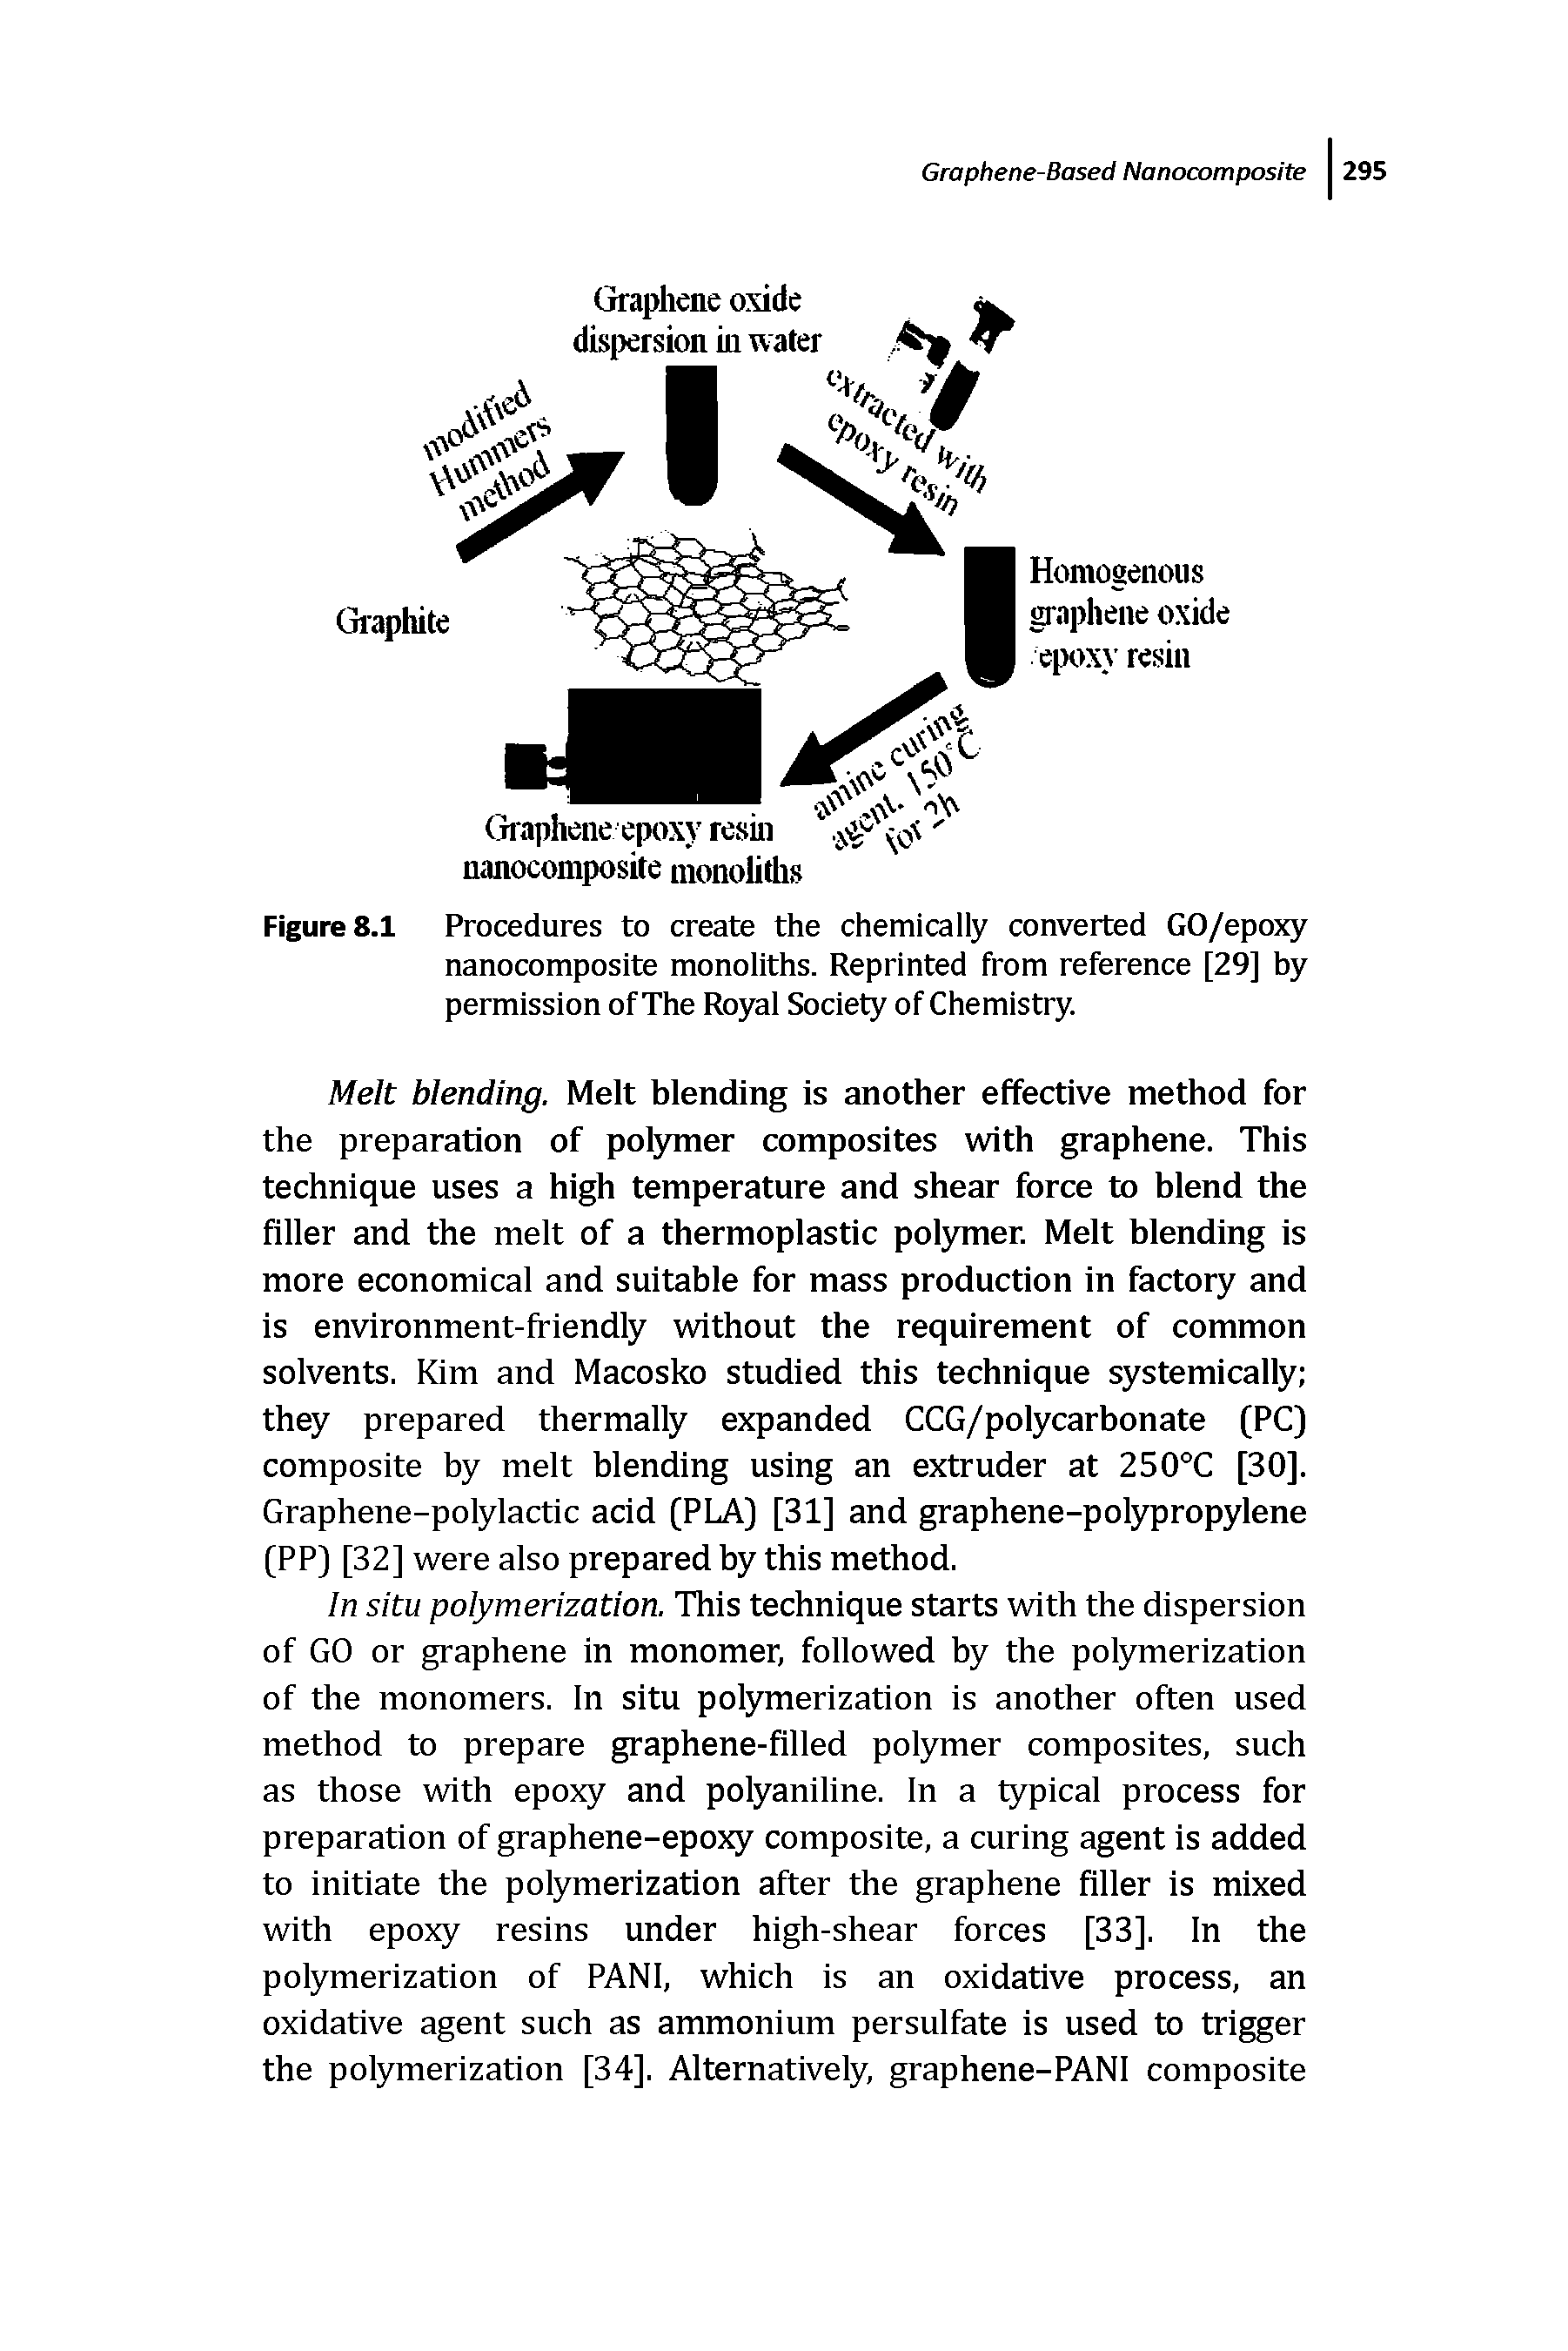 Figures. Procedures to create the chemically converted GO/epoxy nanocomposite monoliths. Reprinted from reference [29] by permission of The Royal Society of Chemistry.